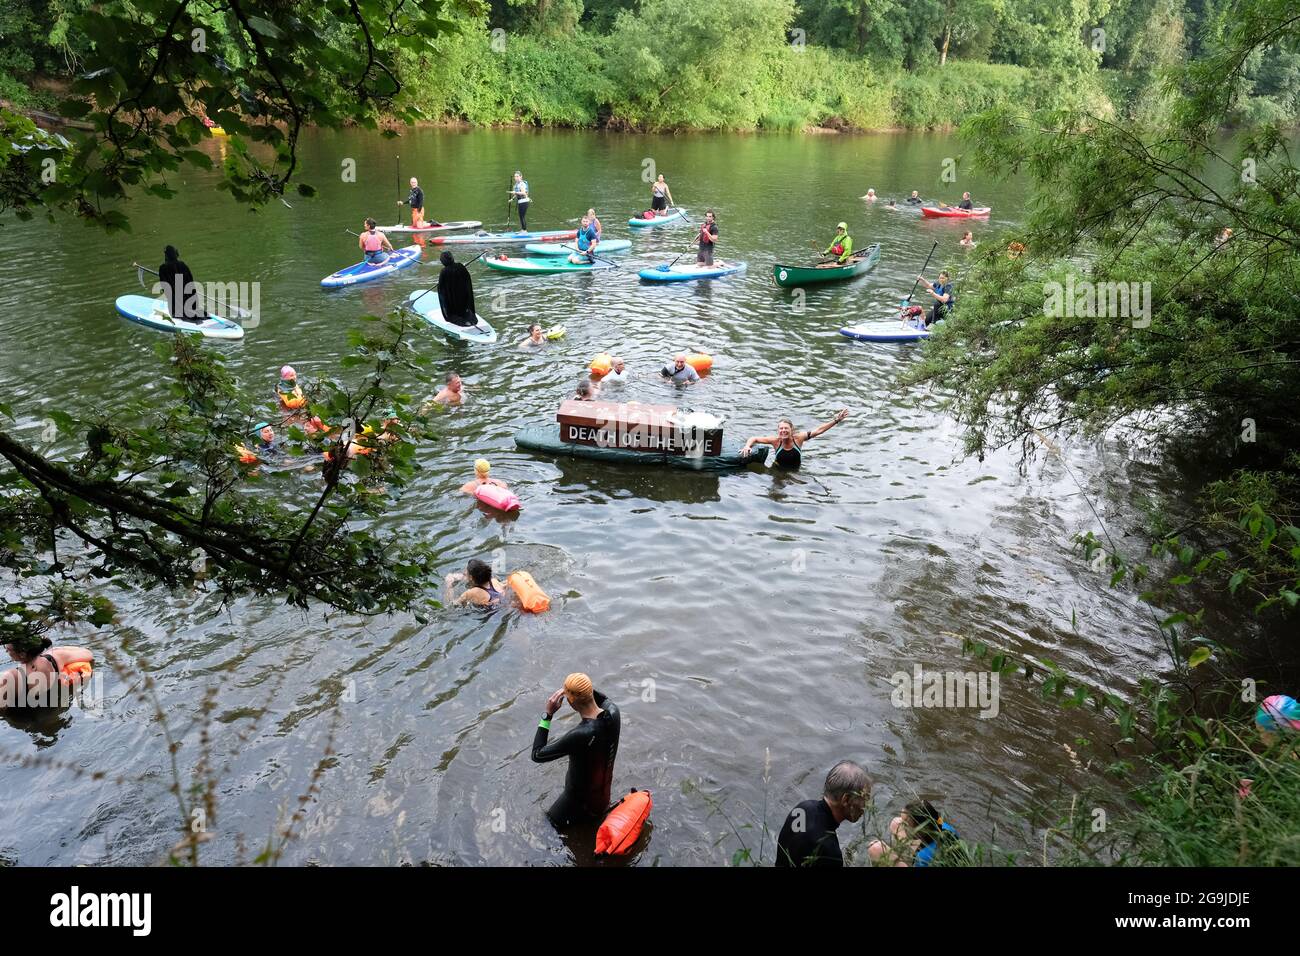 Monmouth, Monmouthshire, Wales, UK – Monday 26th July 2021 – Wild swimming coach Angela Jones leads a swim along the River Wye at Monmouth pulling a mock coffin to protest about the pollution in the Wye. The River Wye has high levels of nitrates and phosphates which protesters say comes from the many intensive poultry farms and the muck spreading of waste beside the the river as the Wye passes through the counties of Powys, Herefordshire and Monmouthshire. Photo Steven May / Alamy Live News Stock Photo